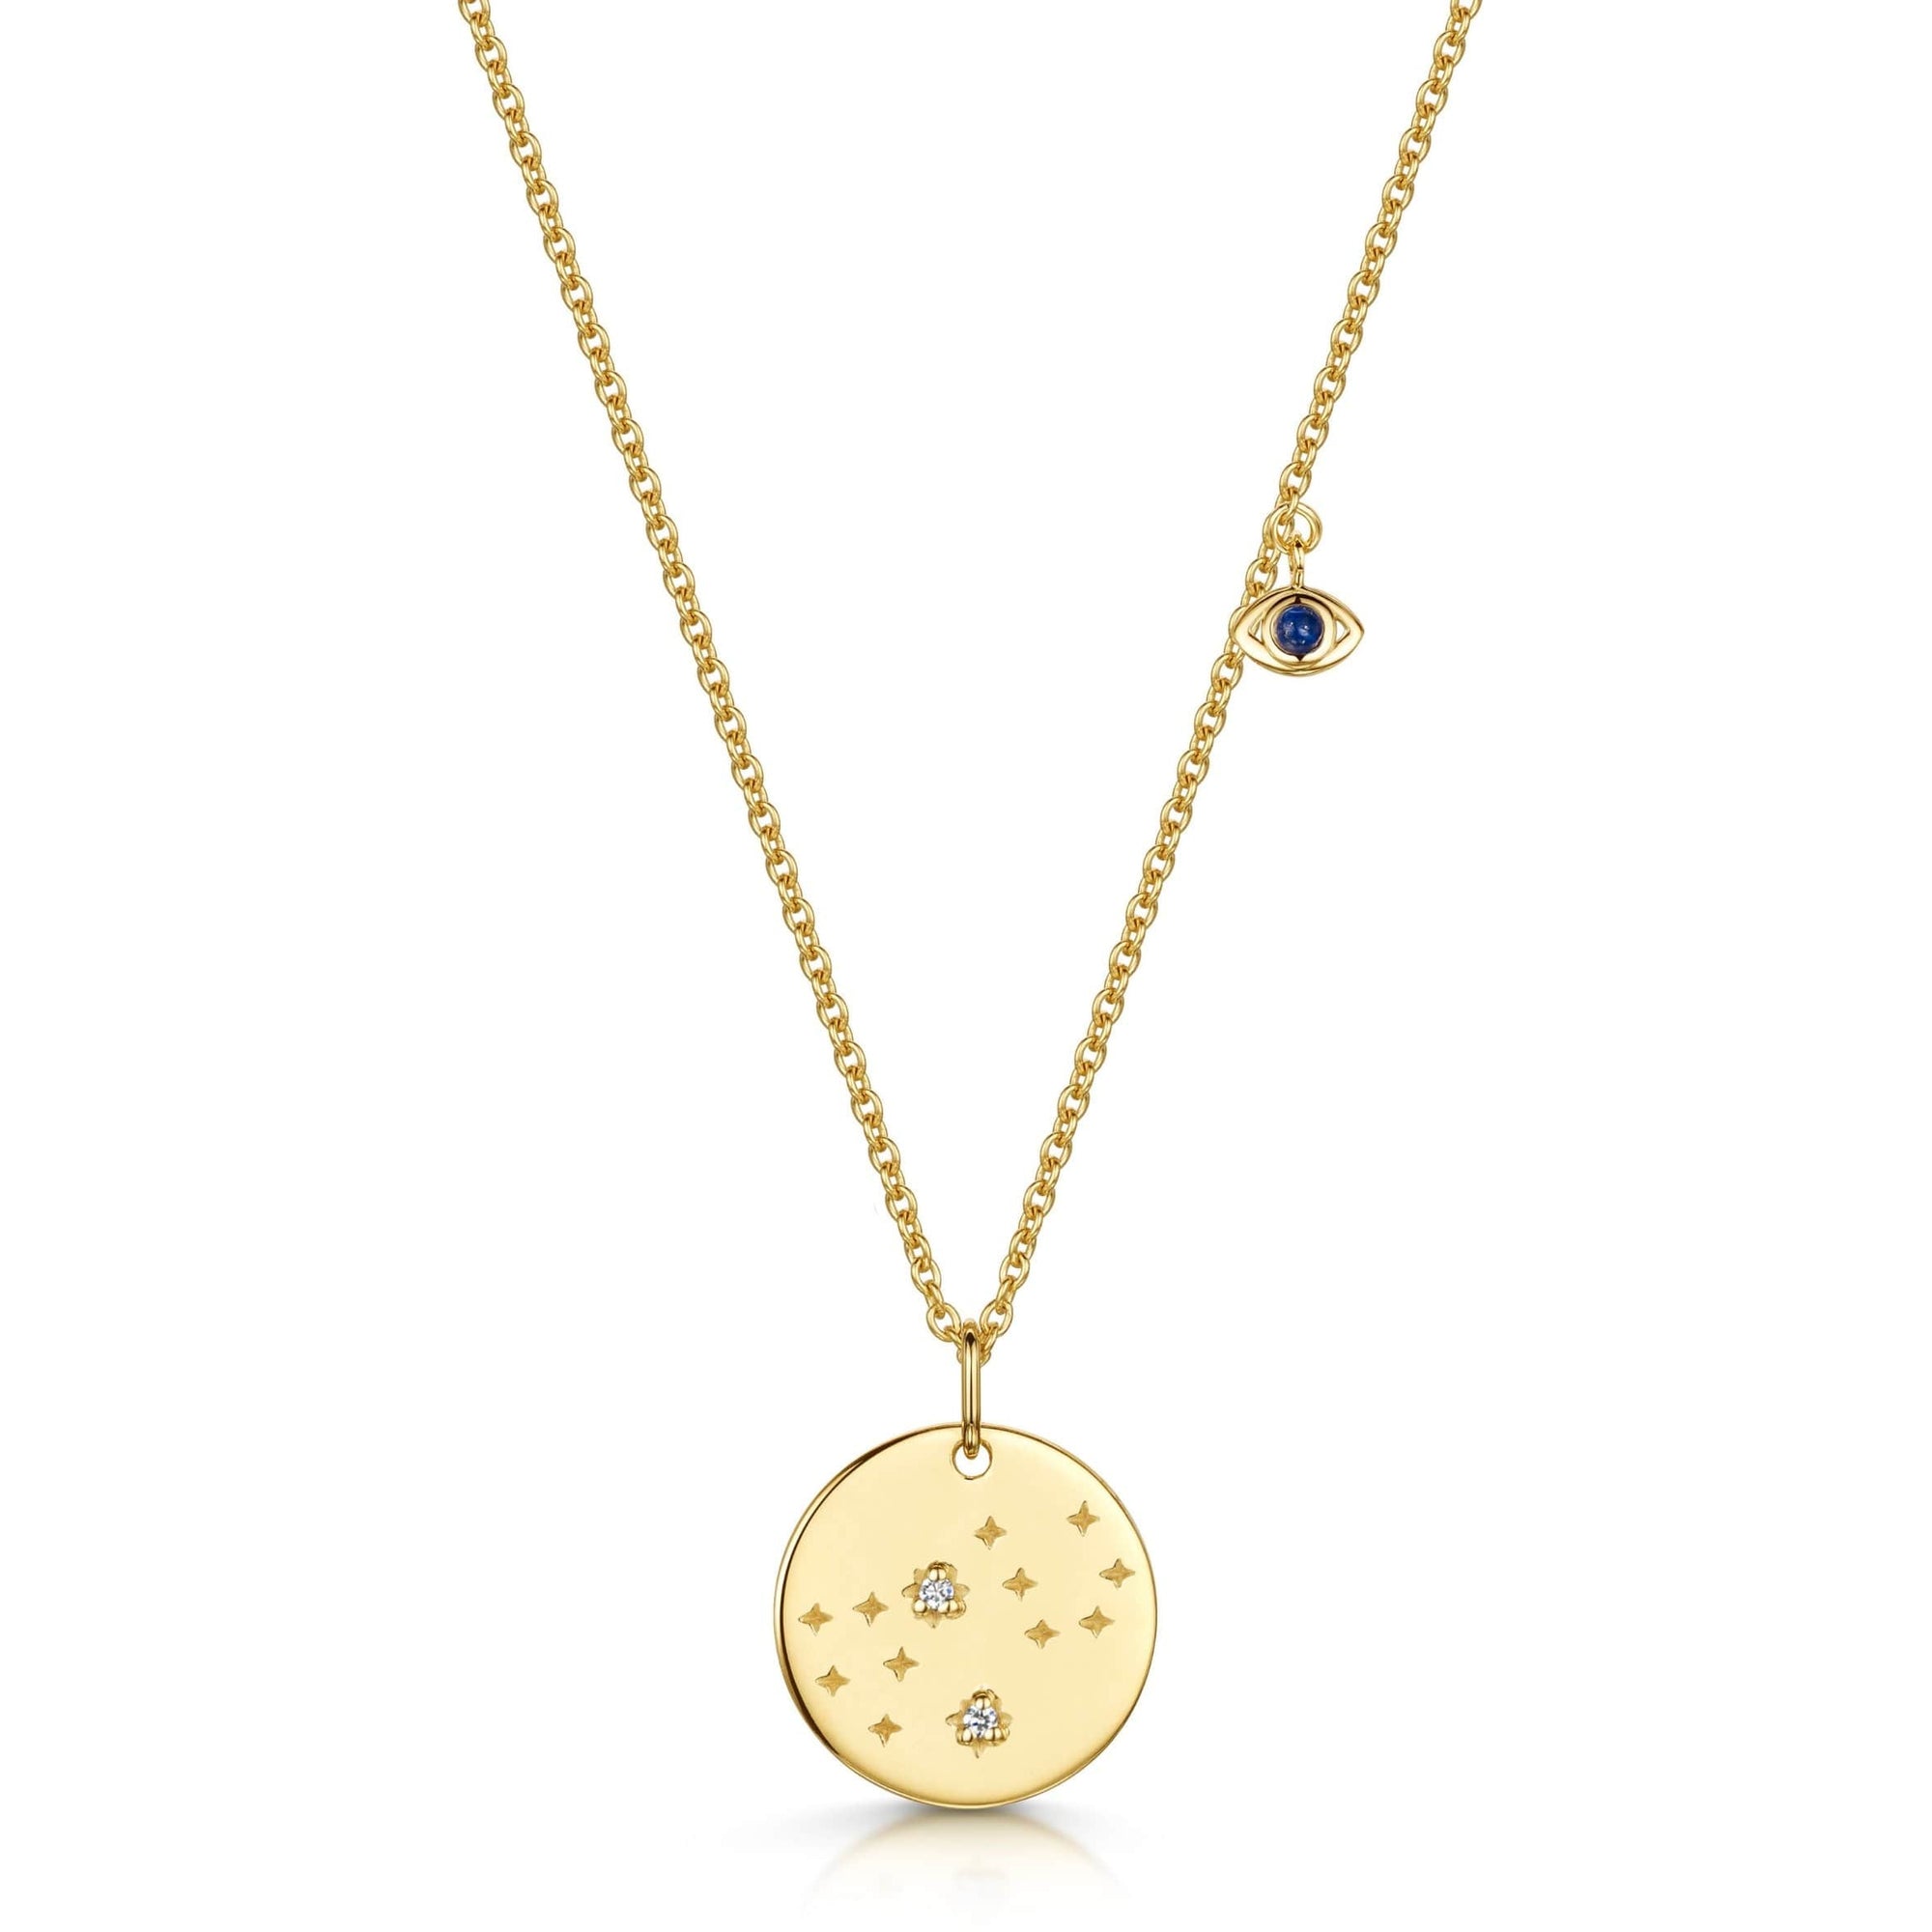 Fervor Montreal Necklace Virgo Double-Sided Zodiac & Constellation Necklace